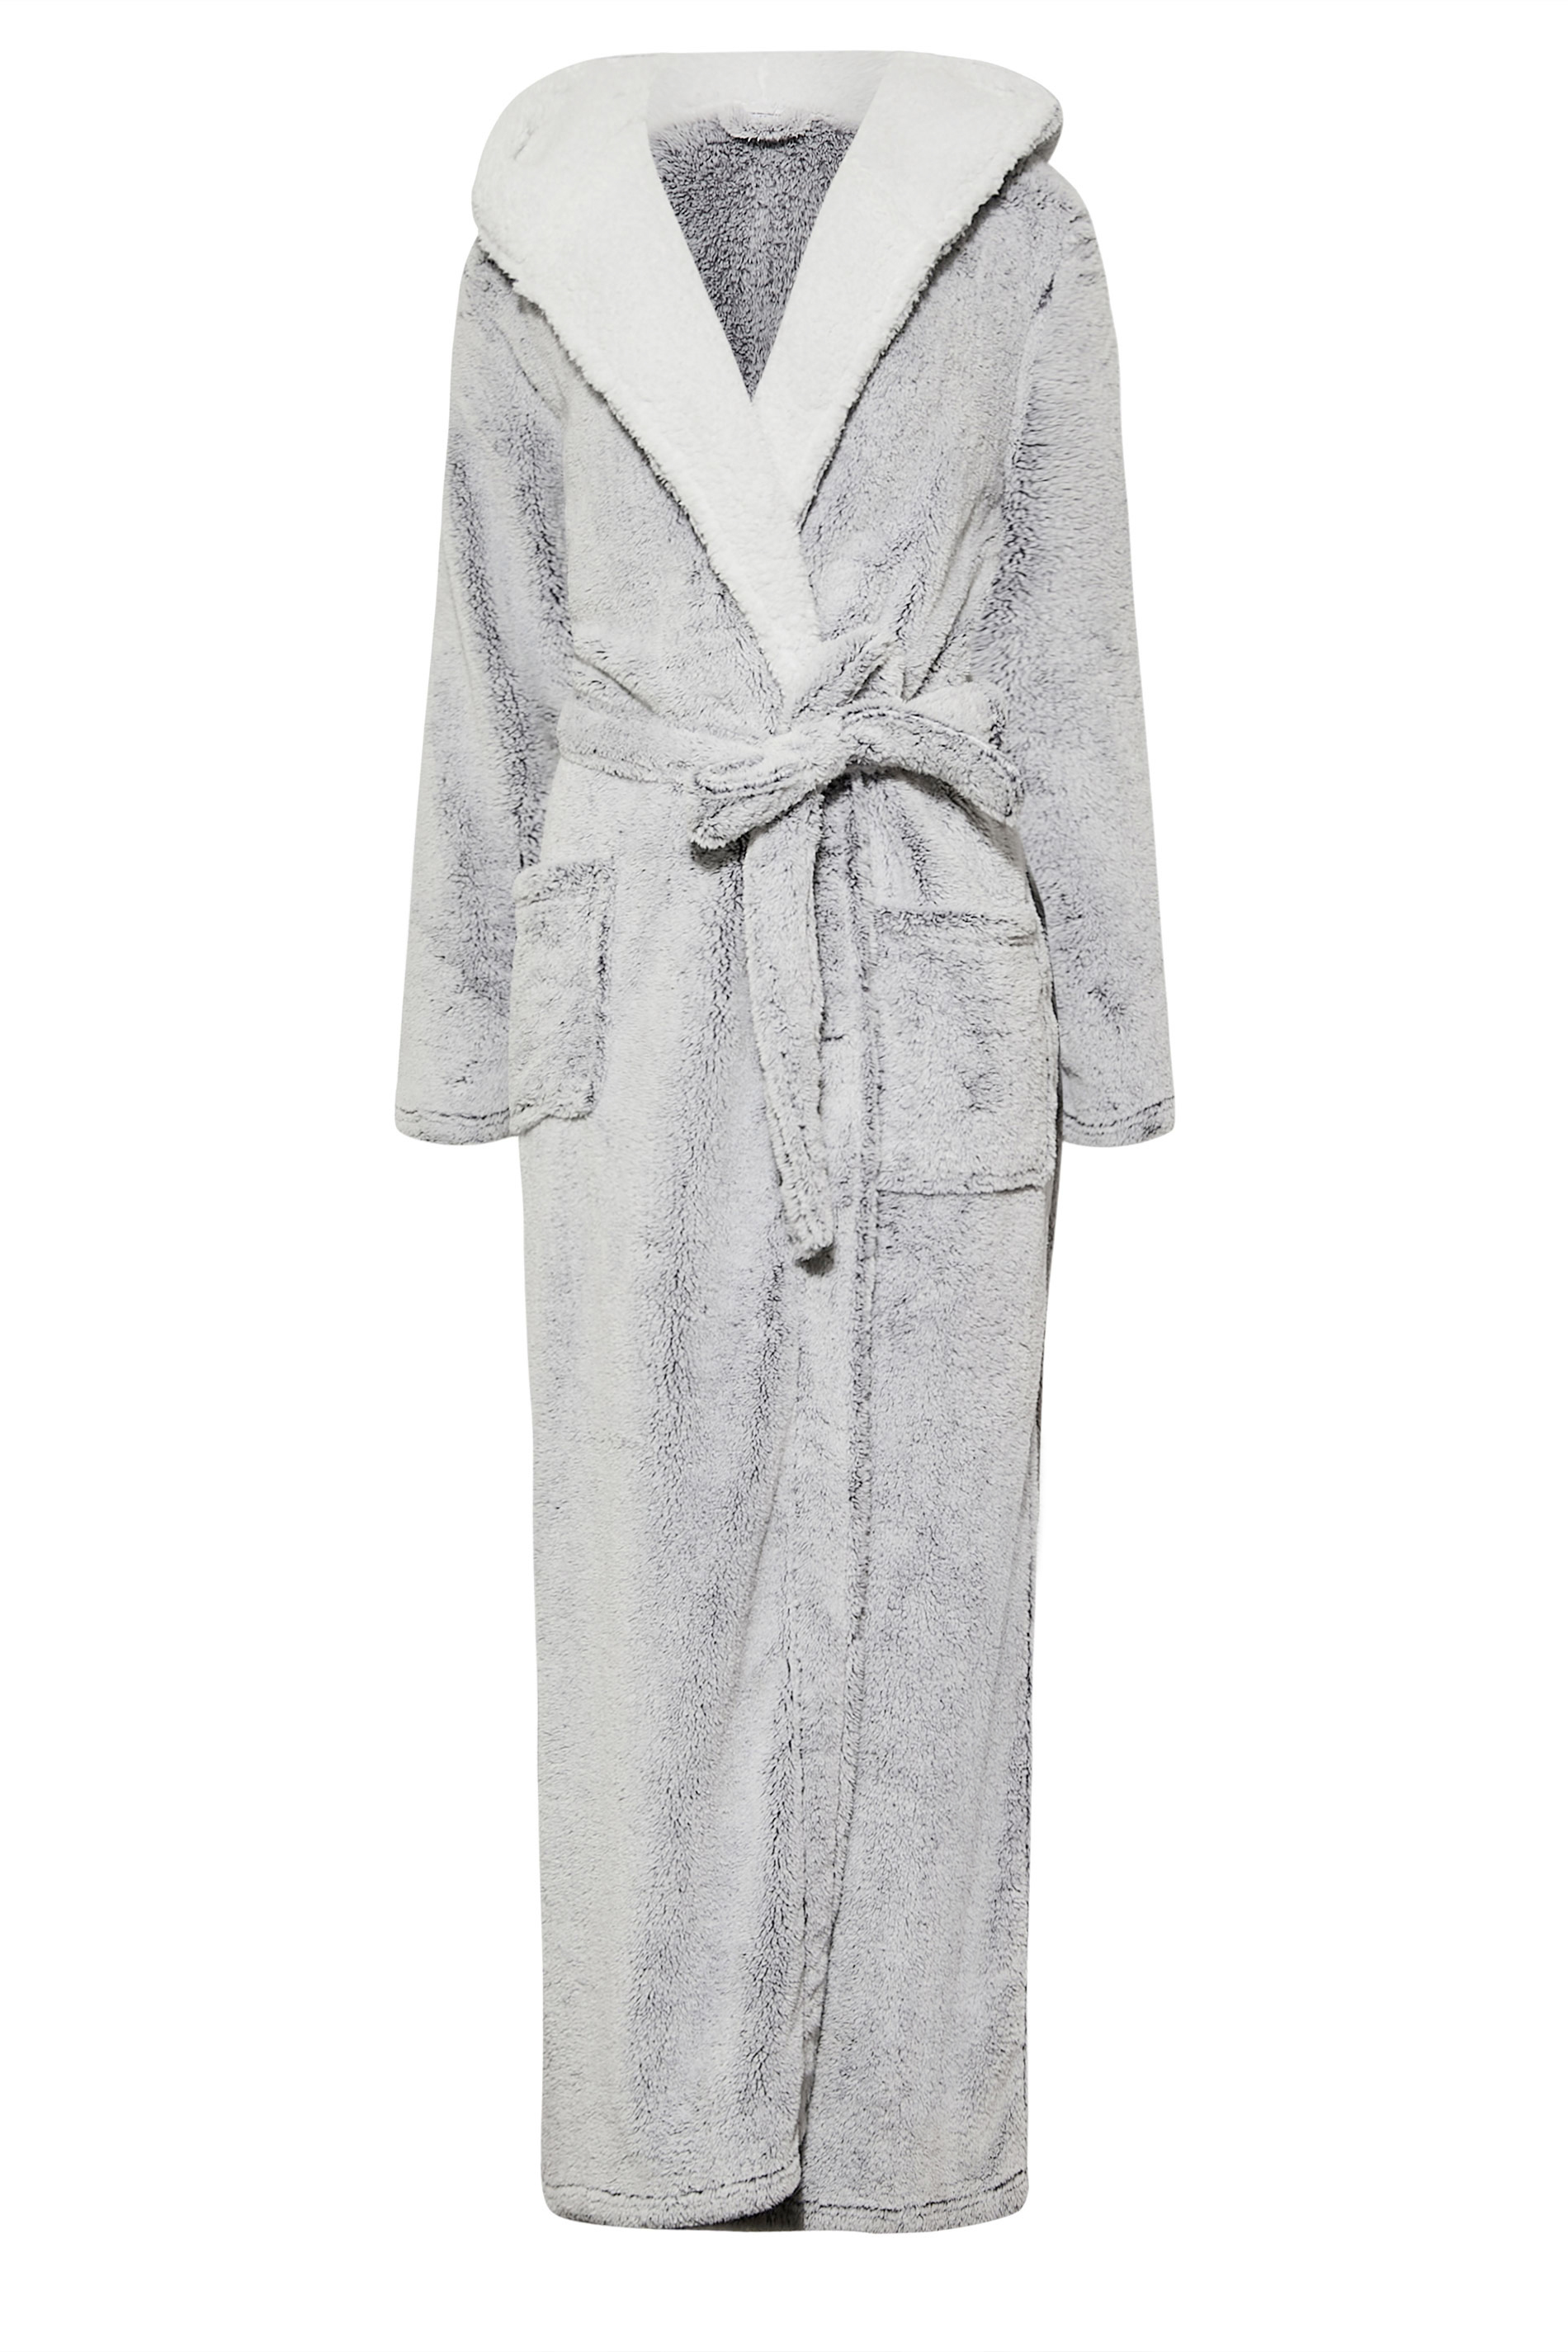 white fluffy hooded dressing gown